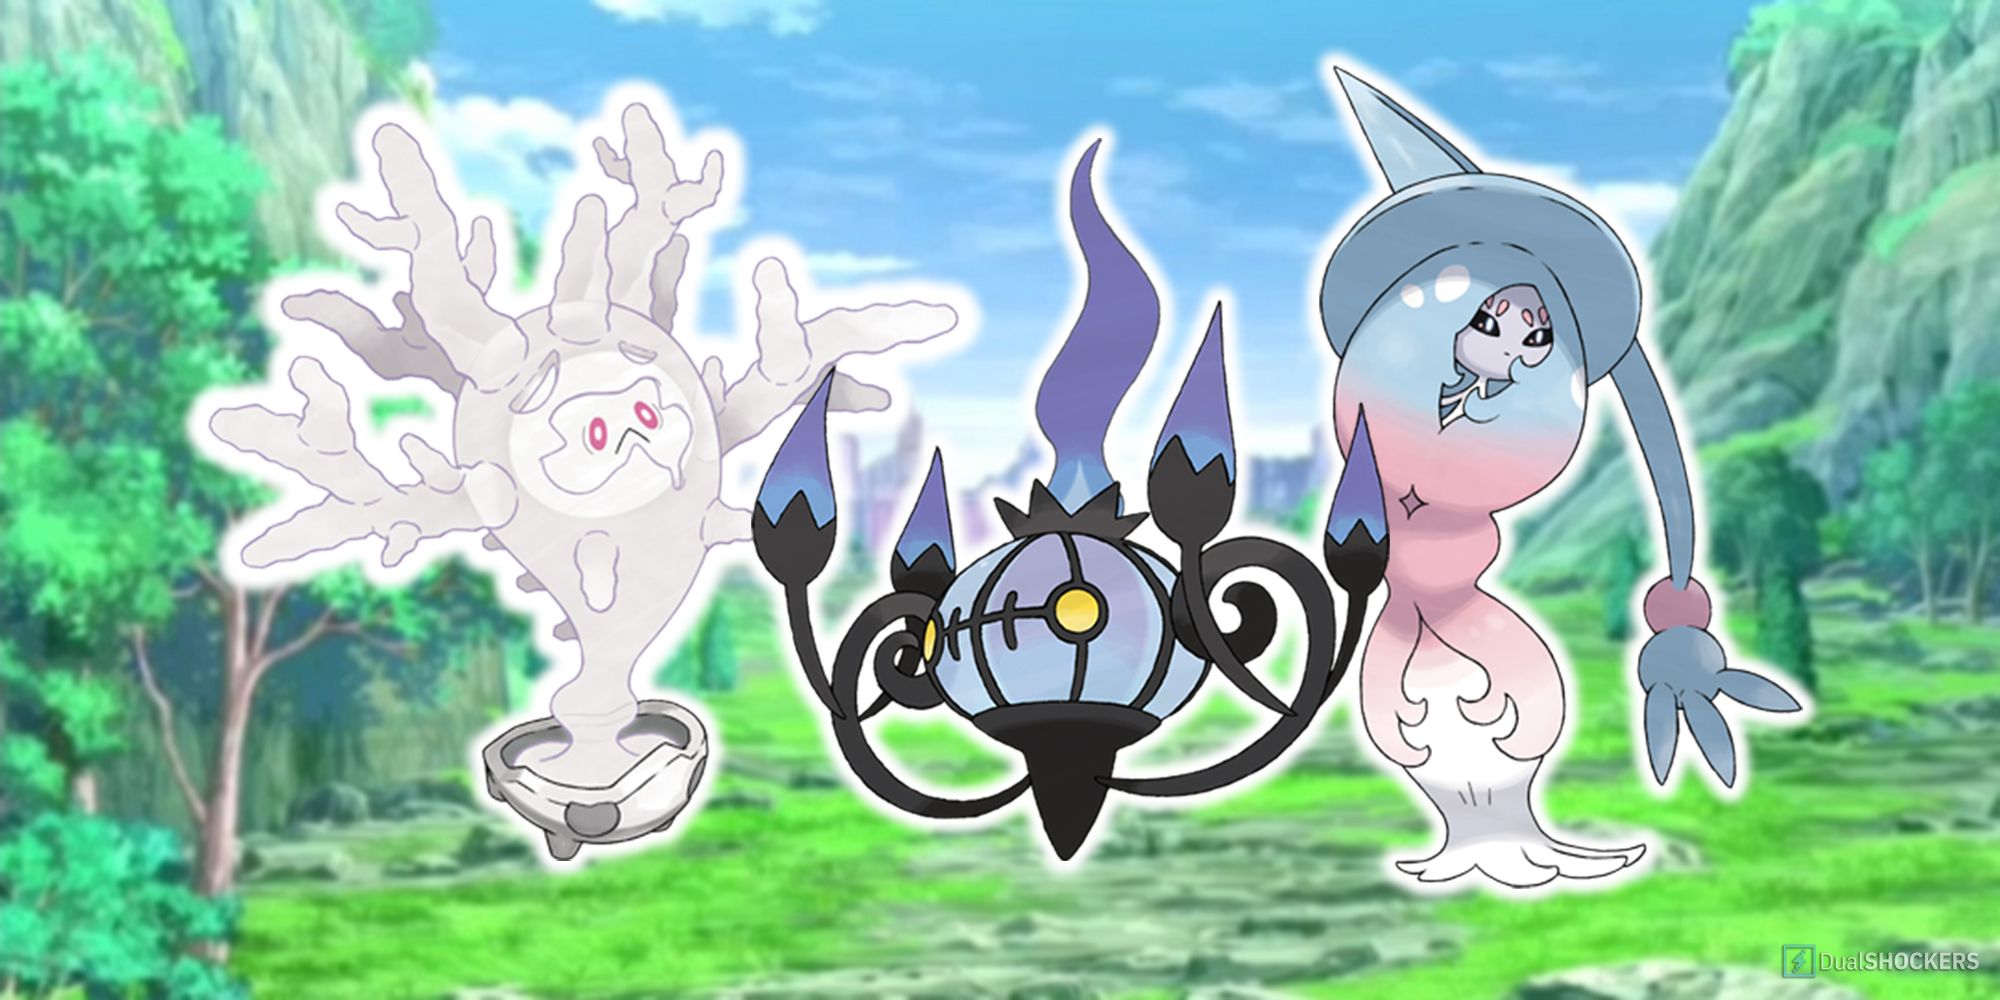 Cursola, Chandelure, and Hatterene beside each other.